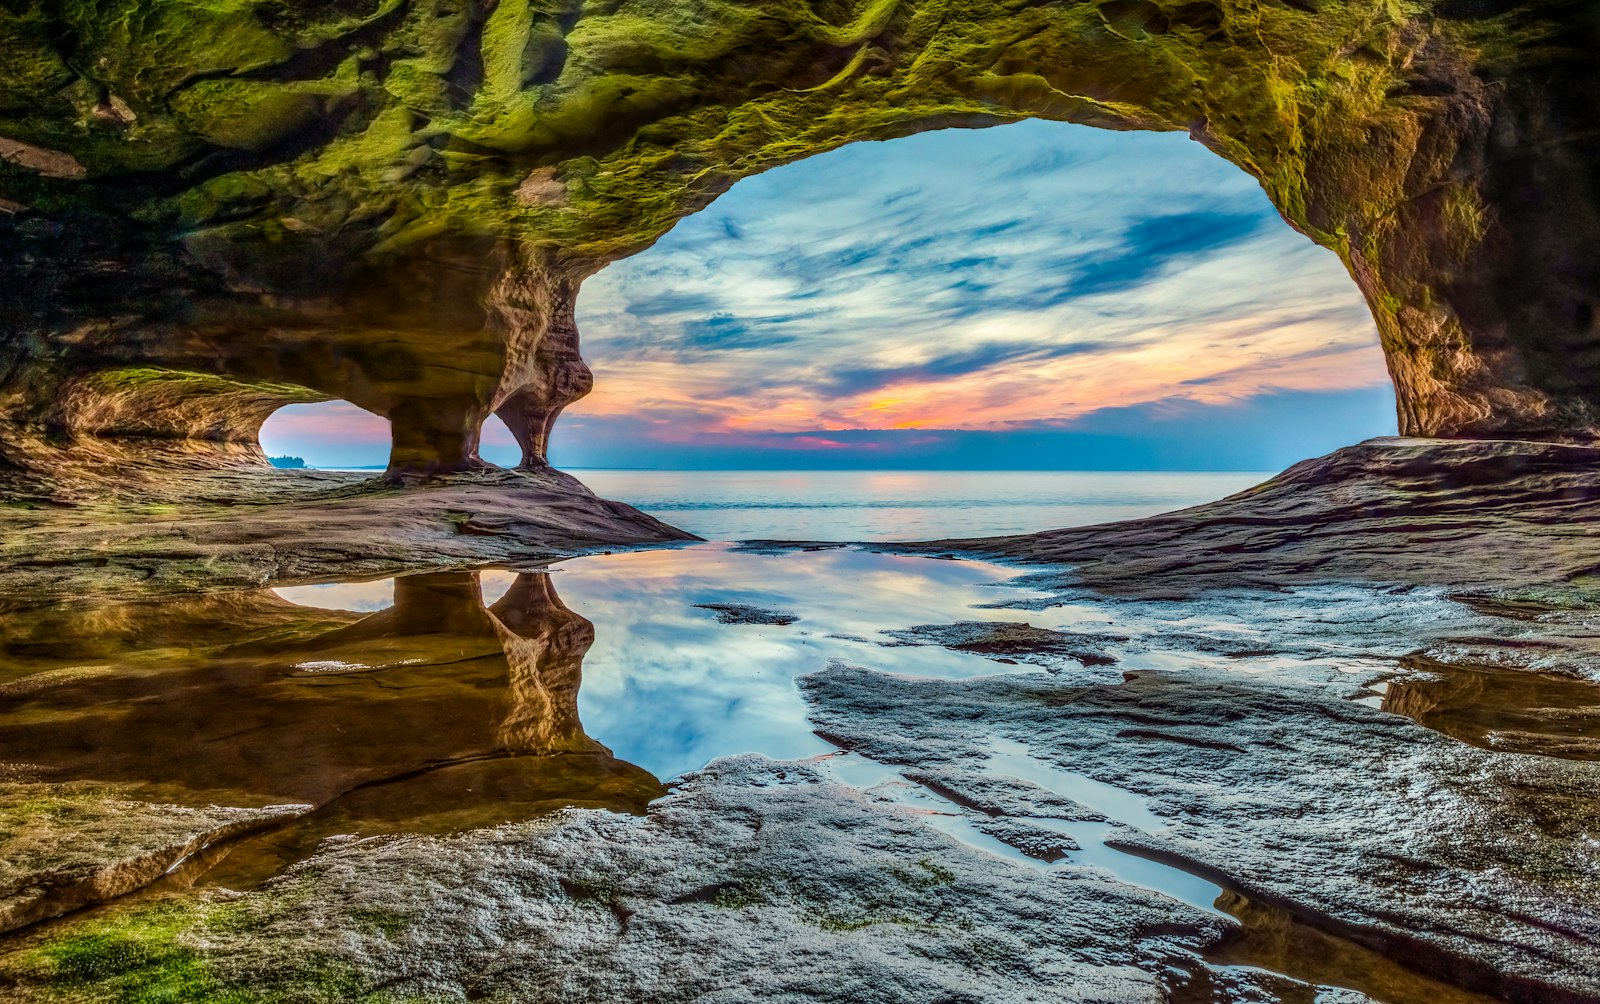 A rainbow sky with clouds is seen through the opening of a natural rock archway. In the foreground, a still lake pools into a rocky shore